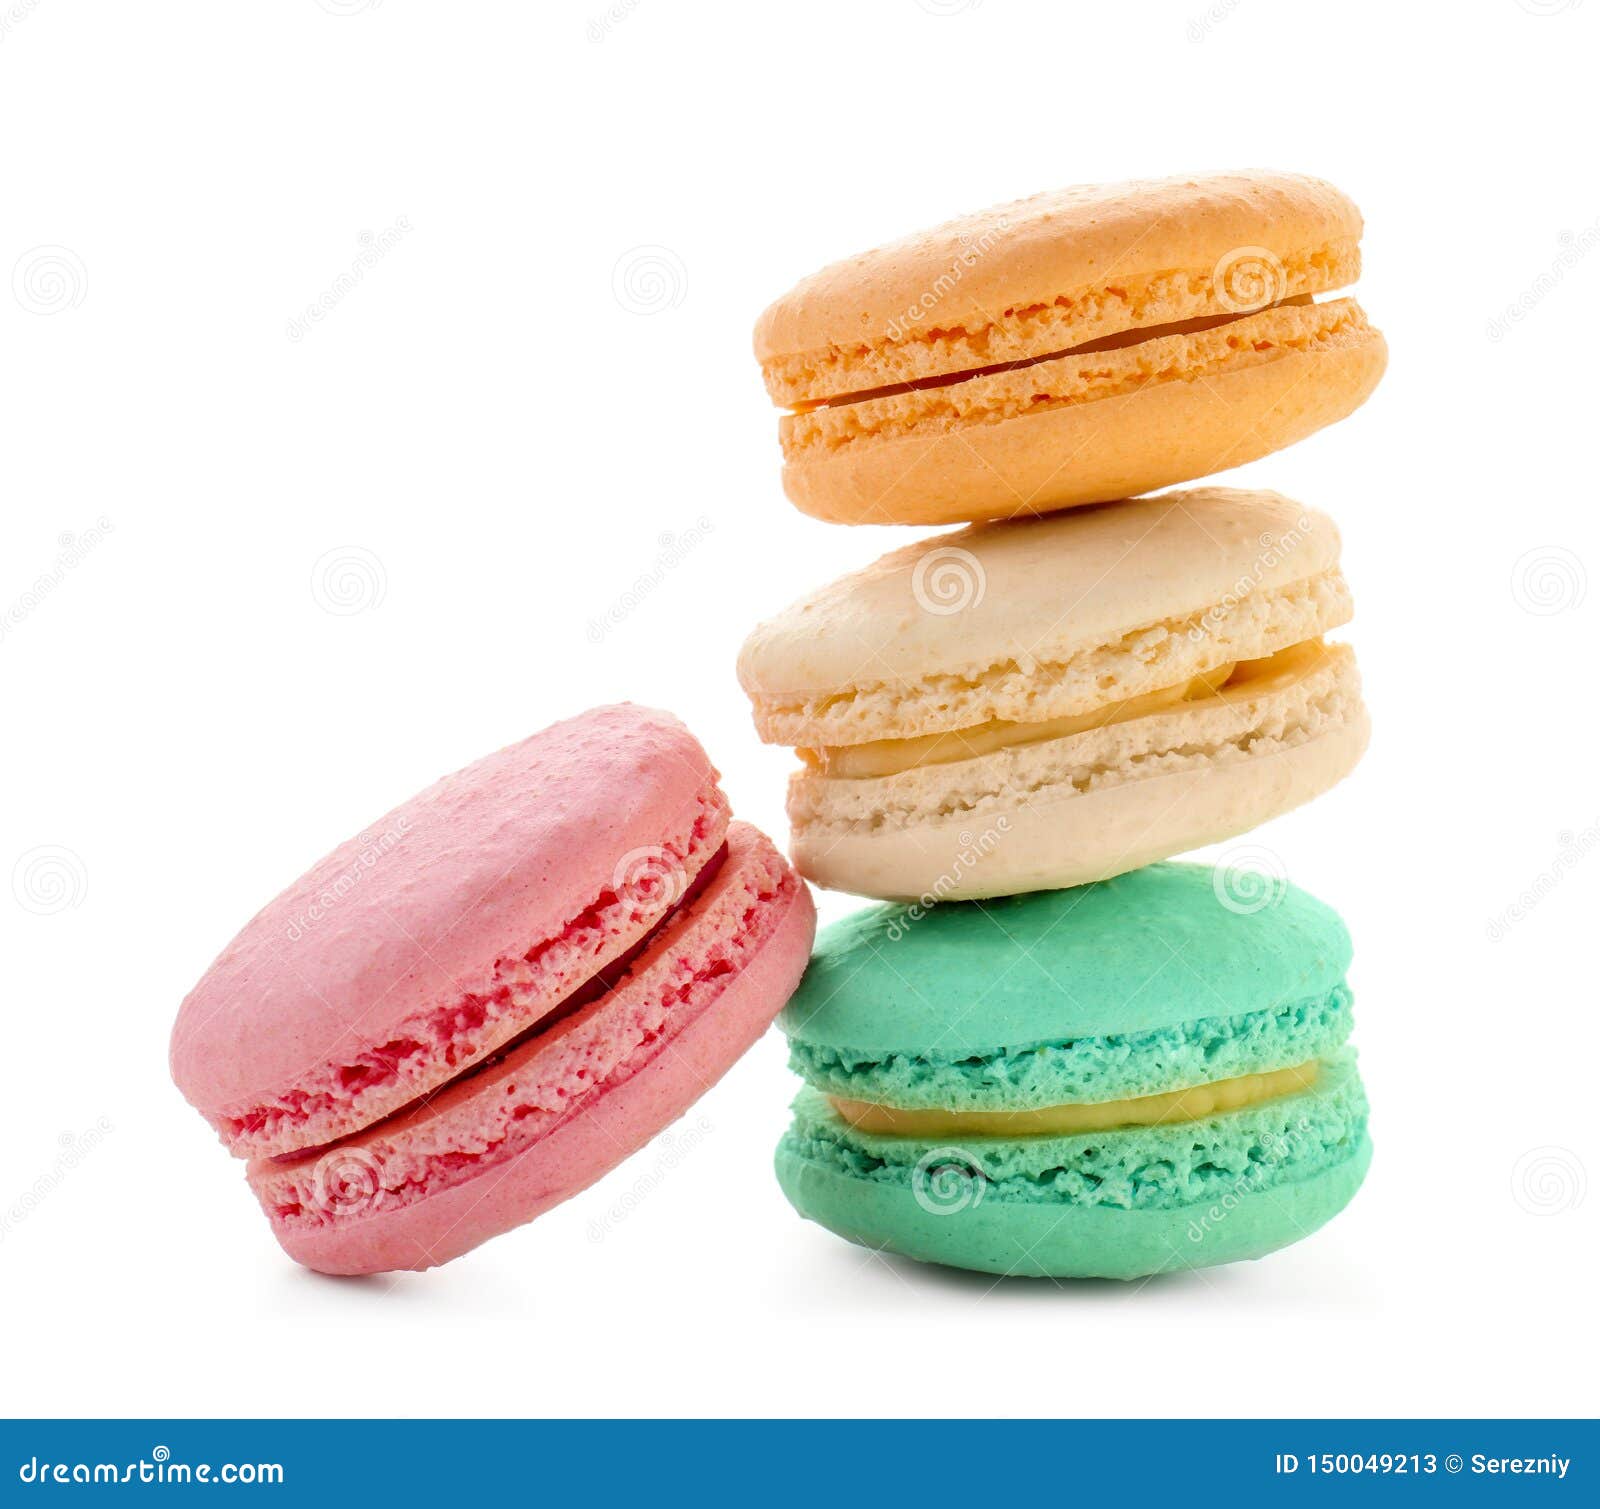 Delicious Colorful Macarons on White Background Stock Image - Image of ...